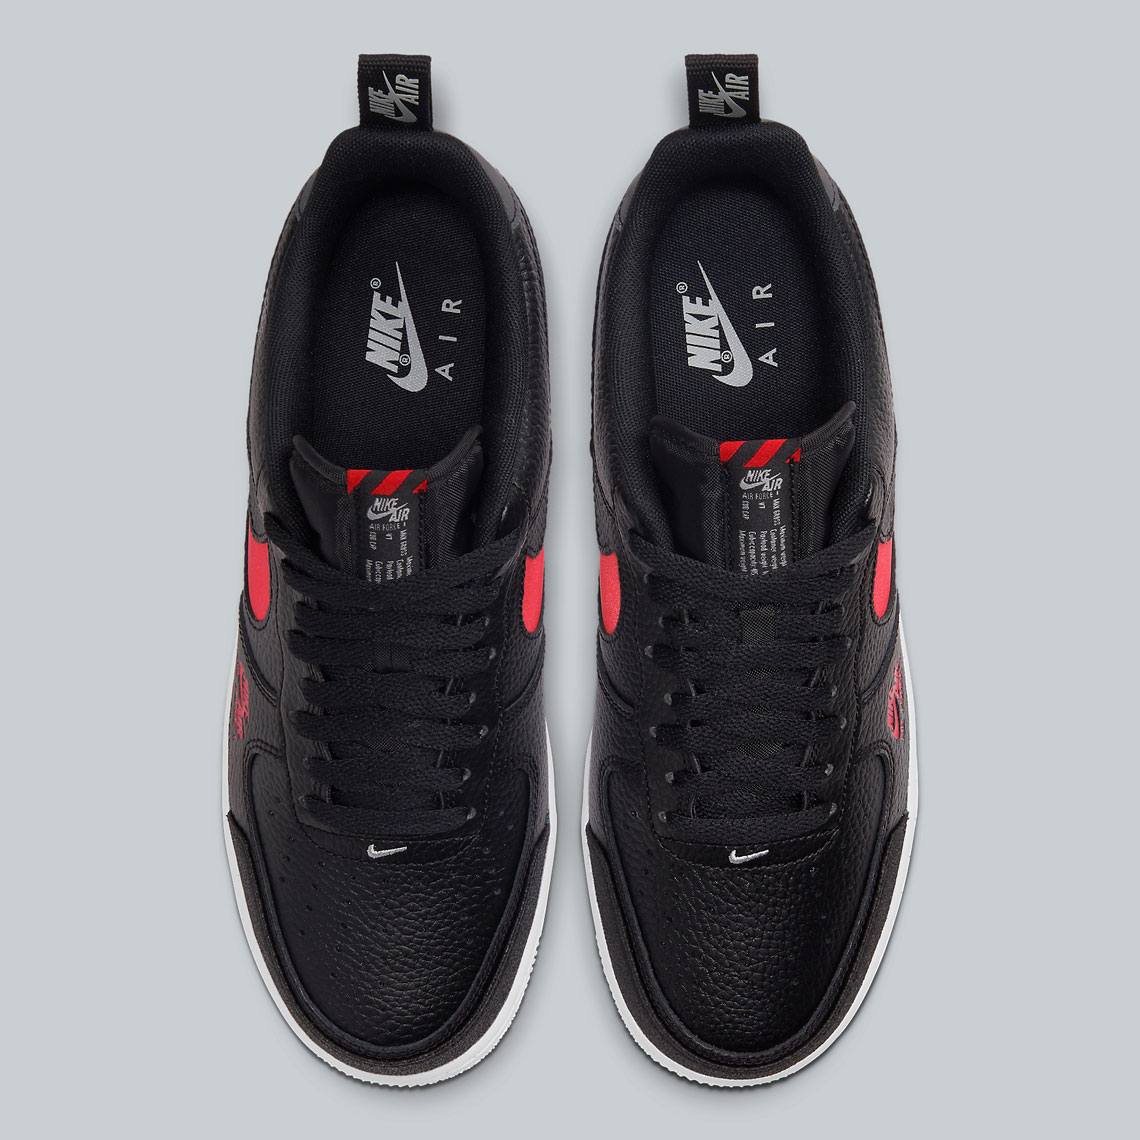 Nike Air Force 1 Low Receives "Bred" Makeover: Photos